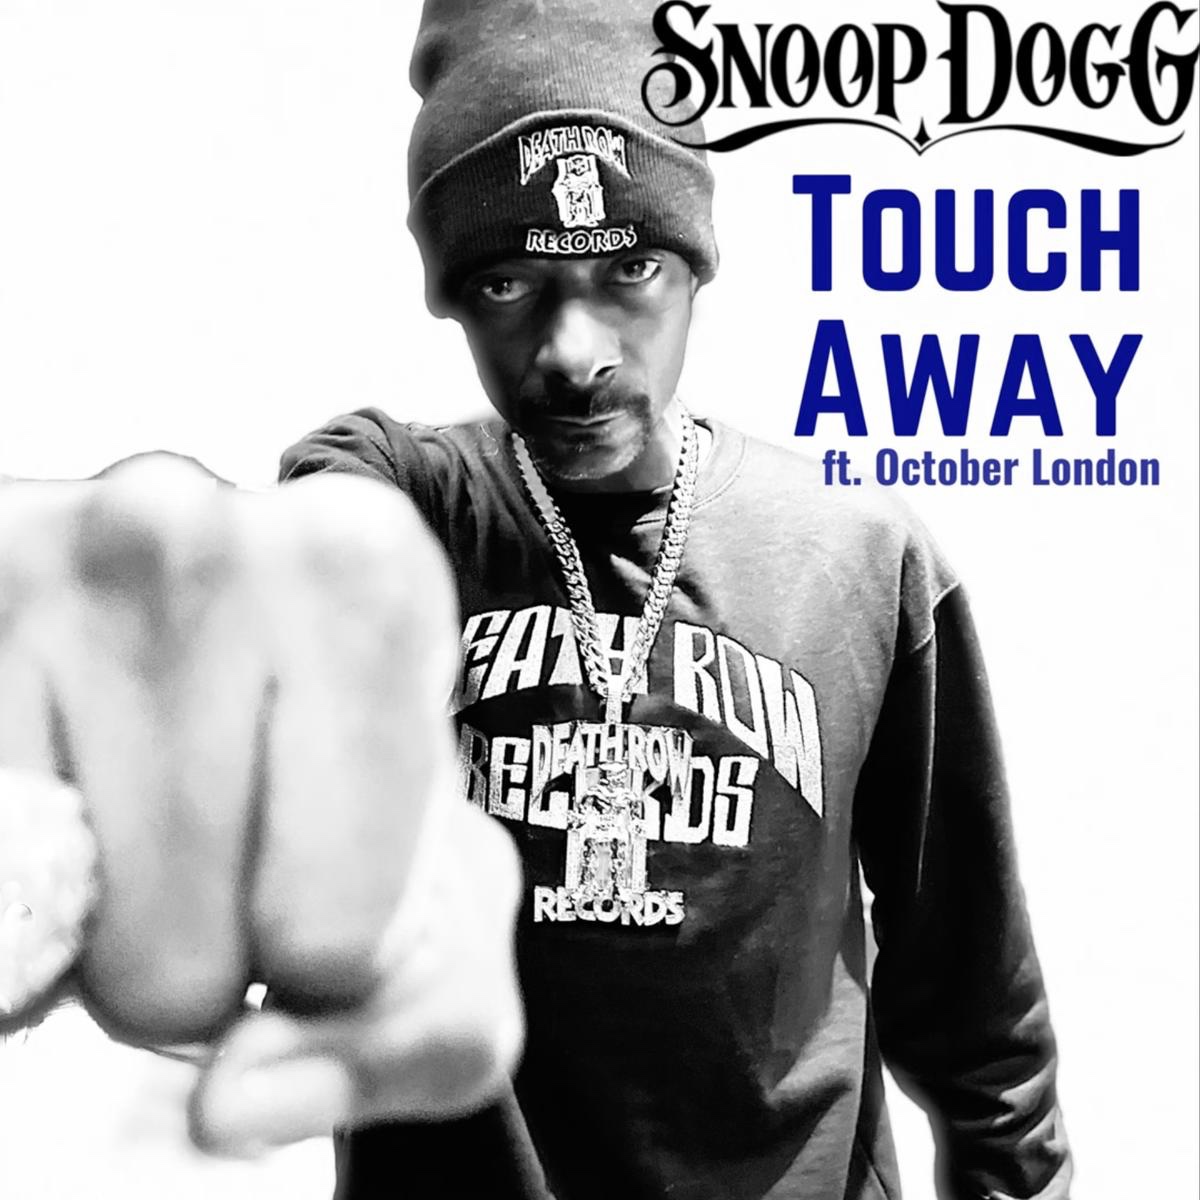 Snoop Dogg Calls On October London For “Touch Away”